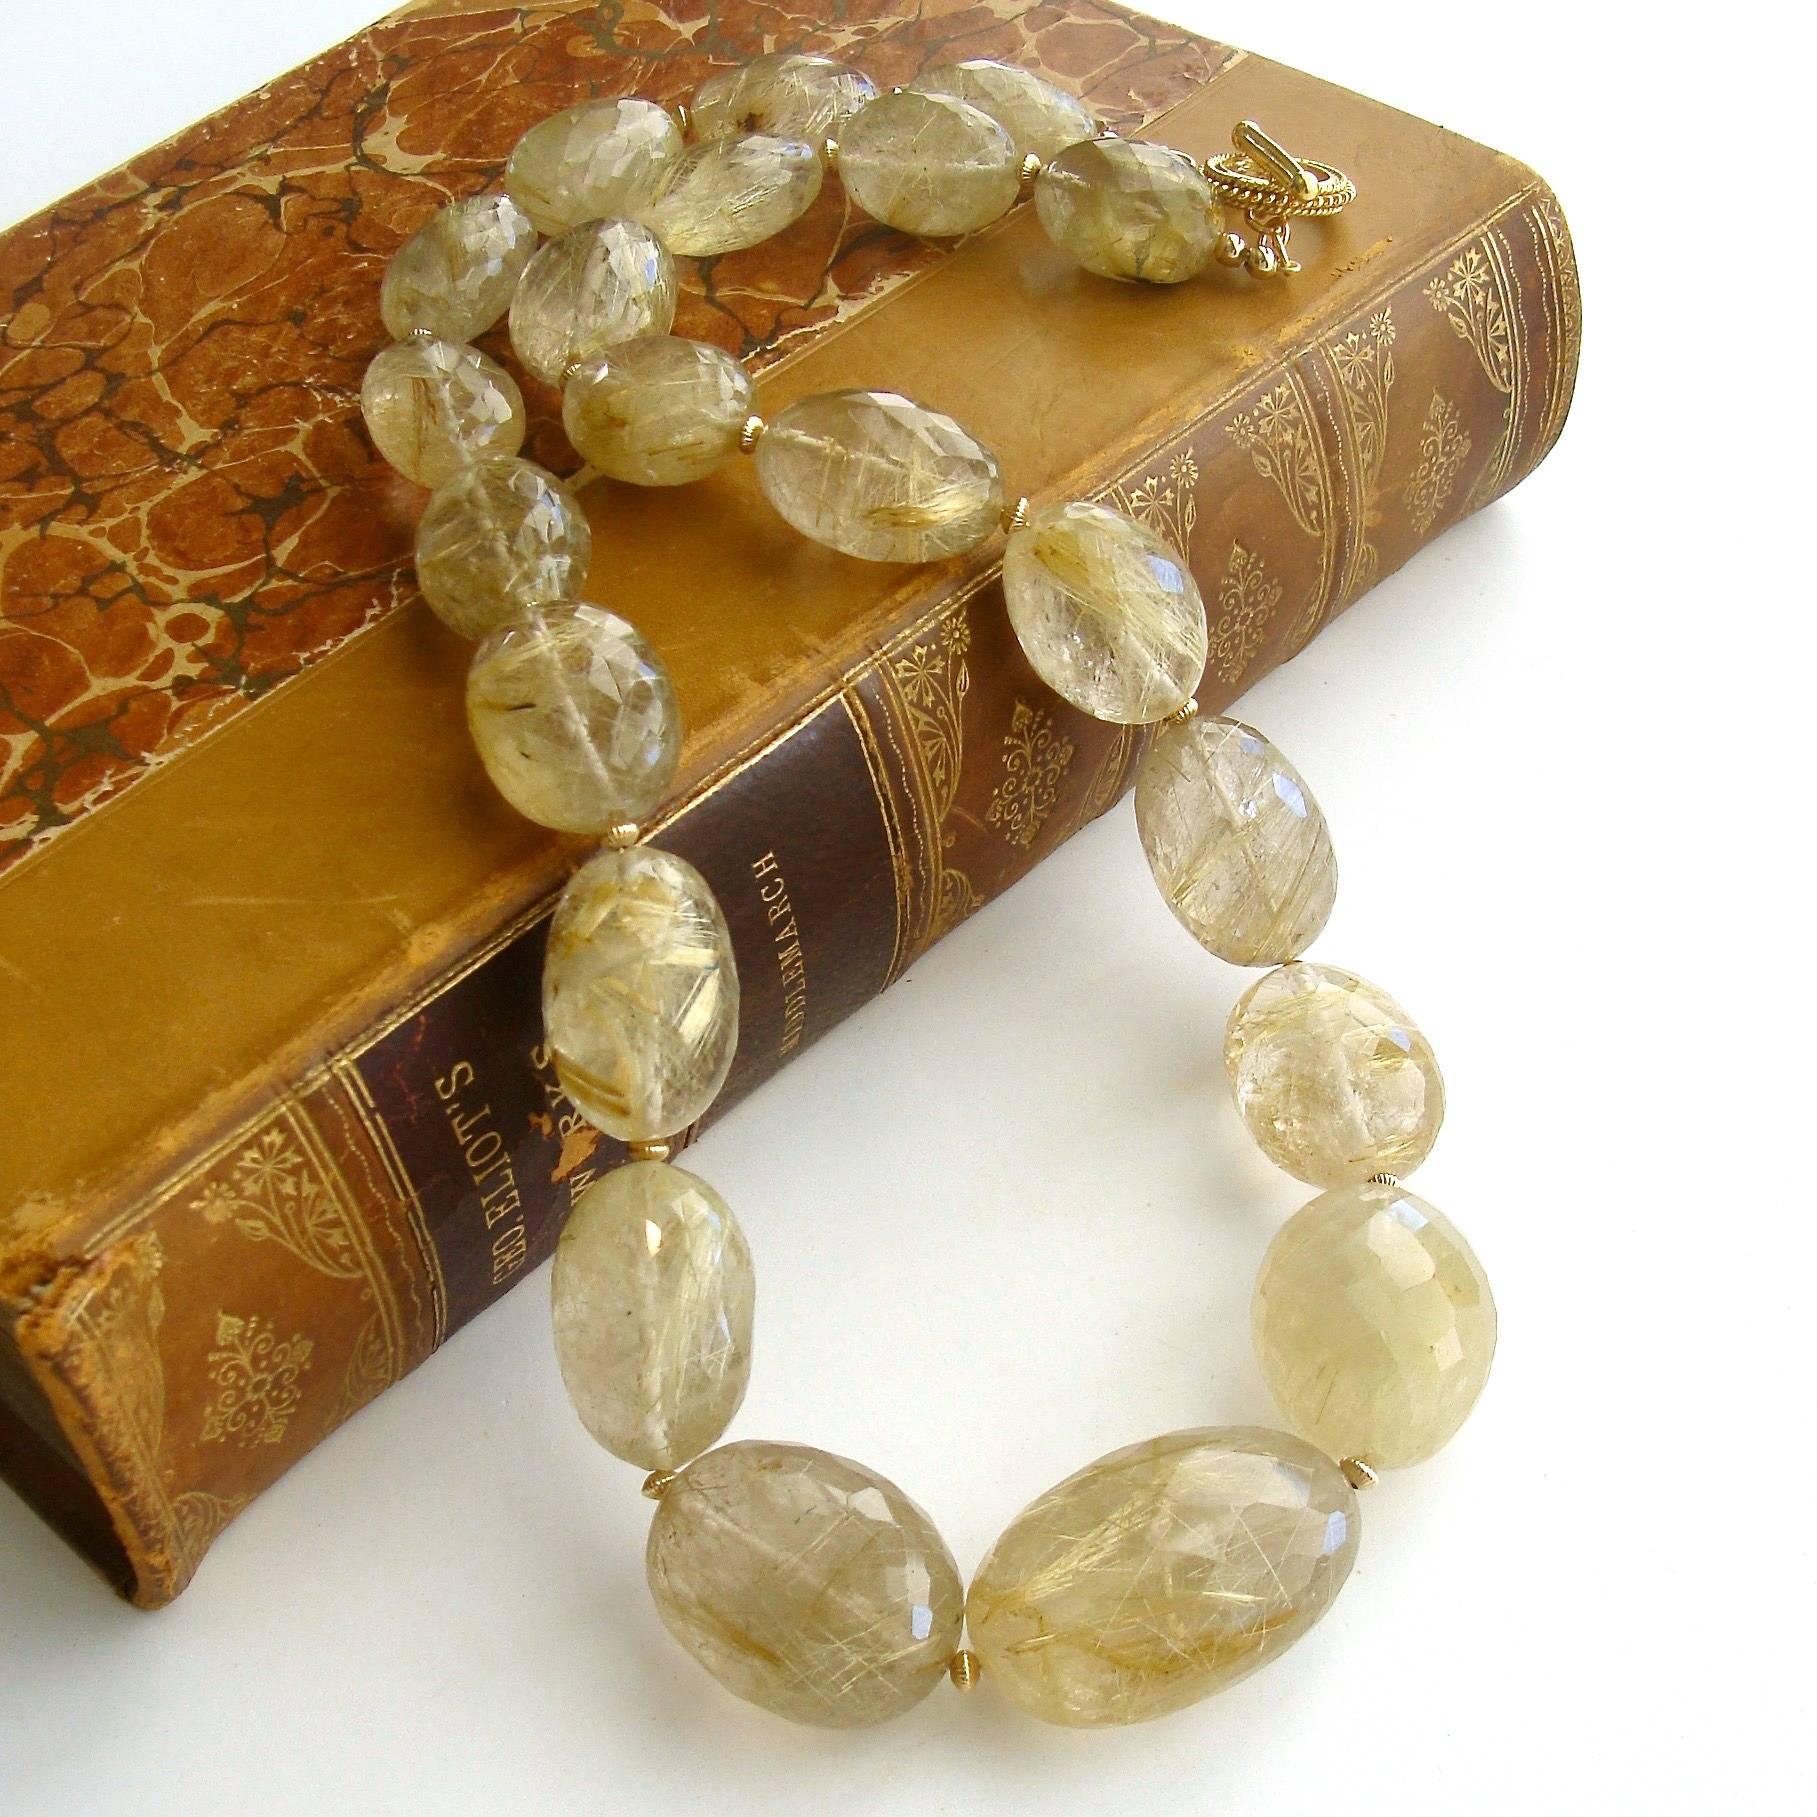 Lisa Necklace.

A breathtaking suite of faceted rutilated quartz oval beads (811.45 cts.), separated by fluted goldfilled rondelles, is the focus of this ethereal fairy tale necklace.  The golden needle-like straws encased within the clear quart